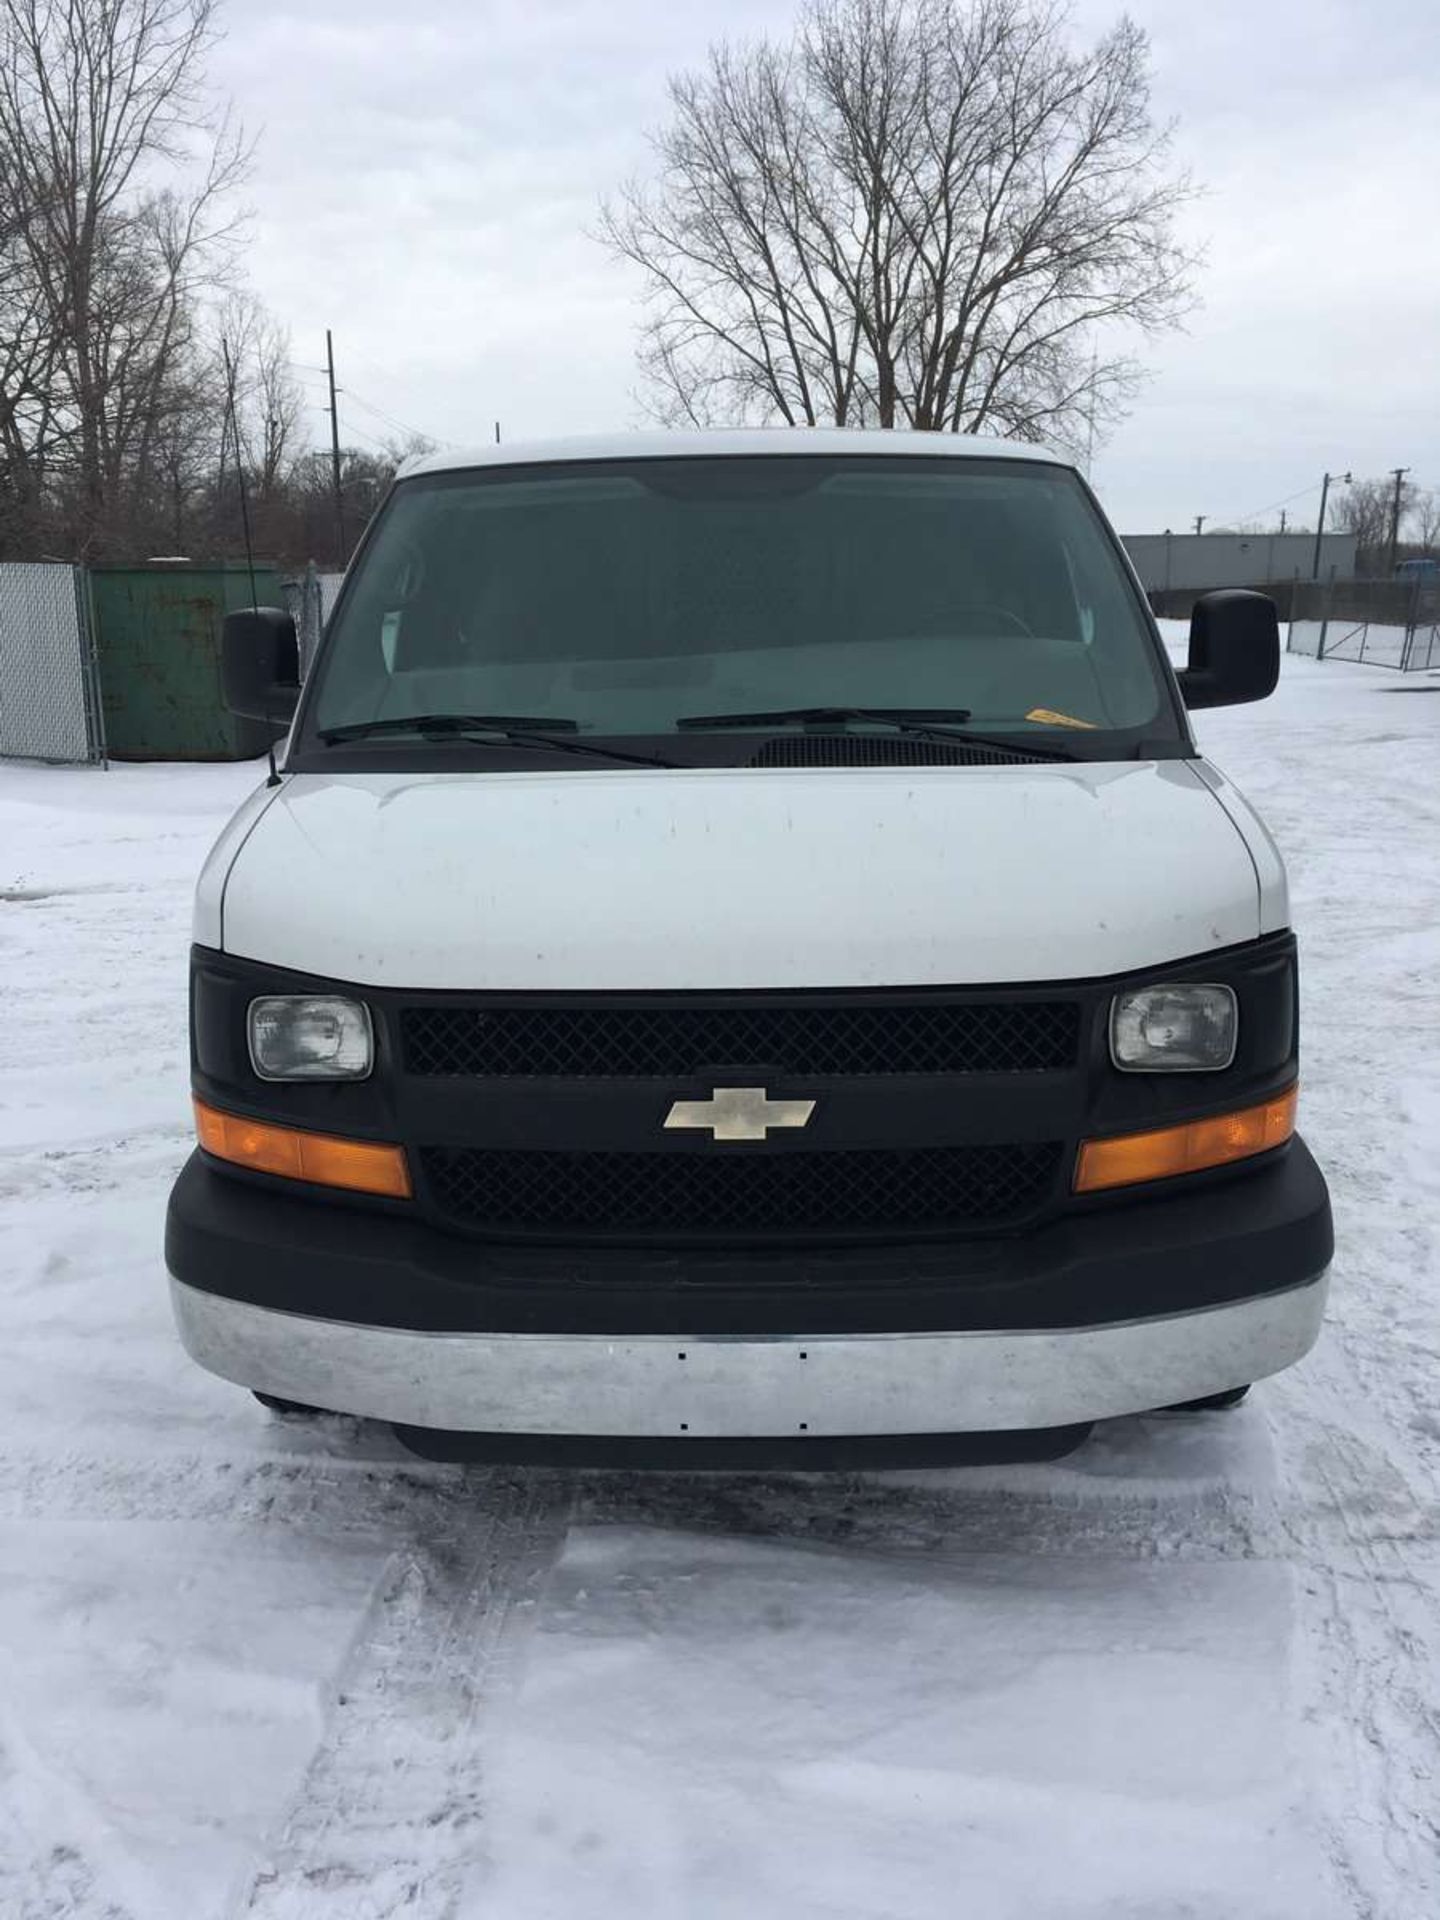 2013 Chevrolet Express 3500 EXT 1 Ton Capacity Extended Cargo Van - Image 2 of 14